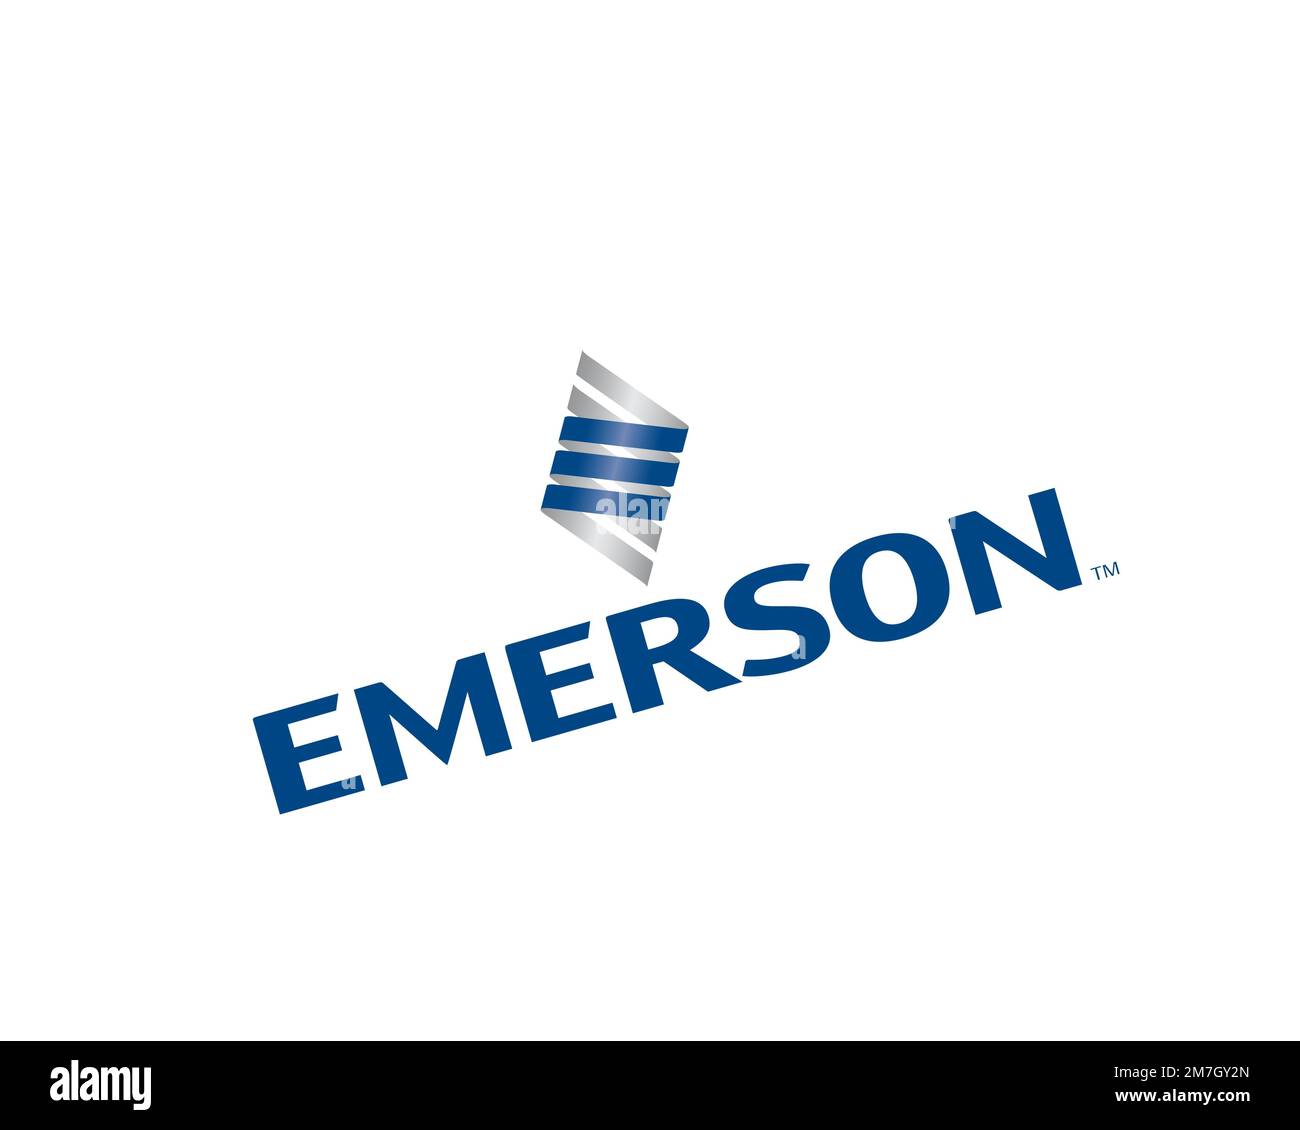 Emerson Electric, Rotated Logo, White Background Stock Photo - Alamy